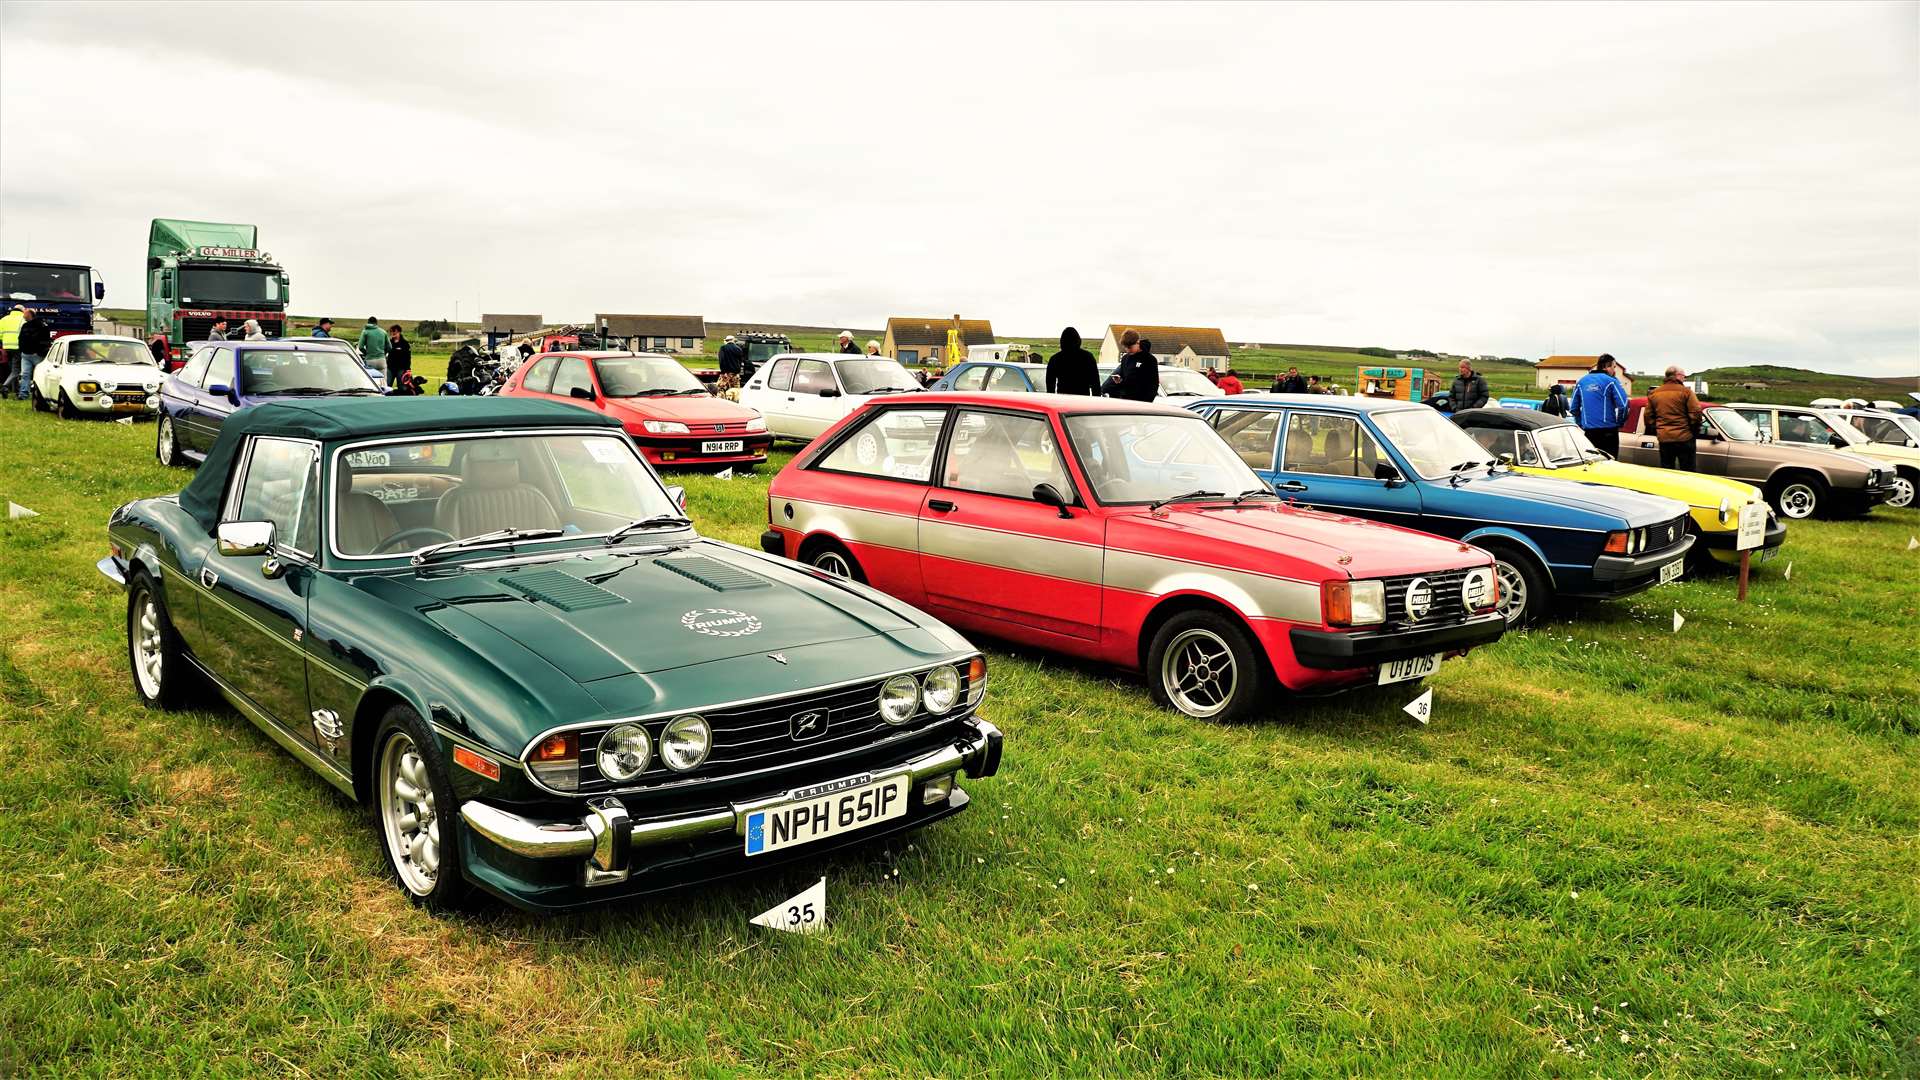 Last year's show featured the usual array of vintage and classic cars. Picture: DGS